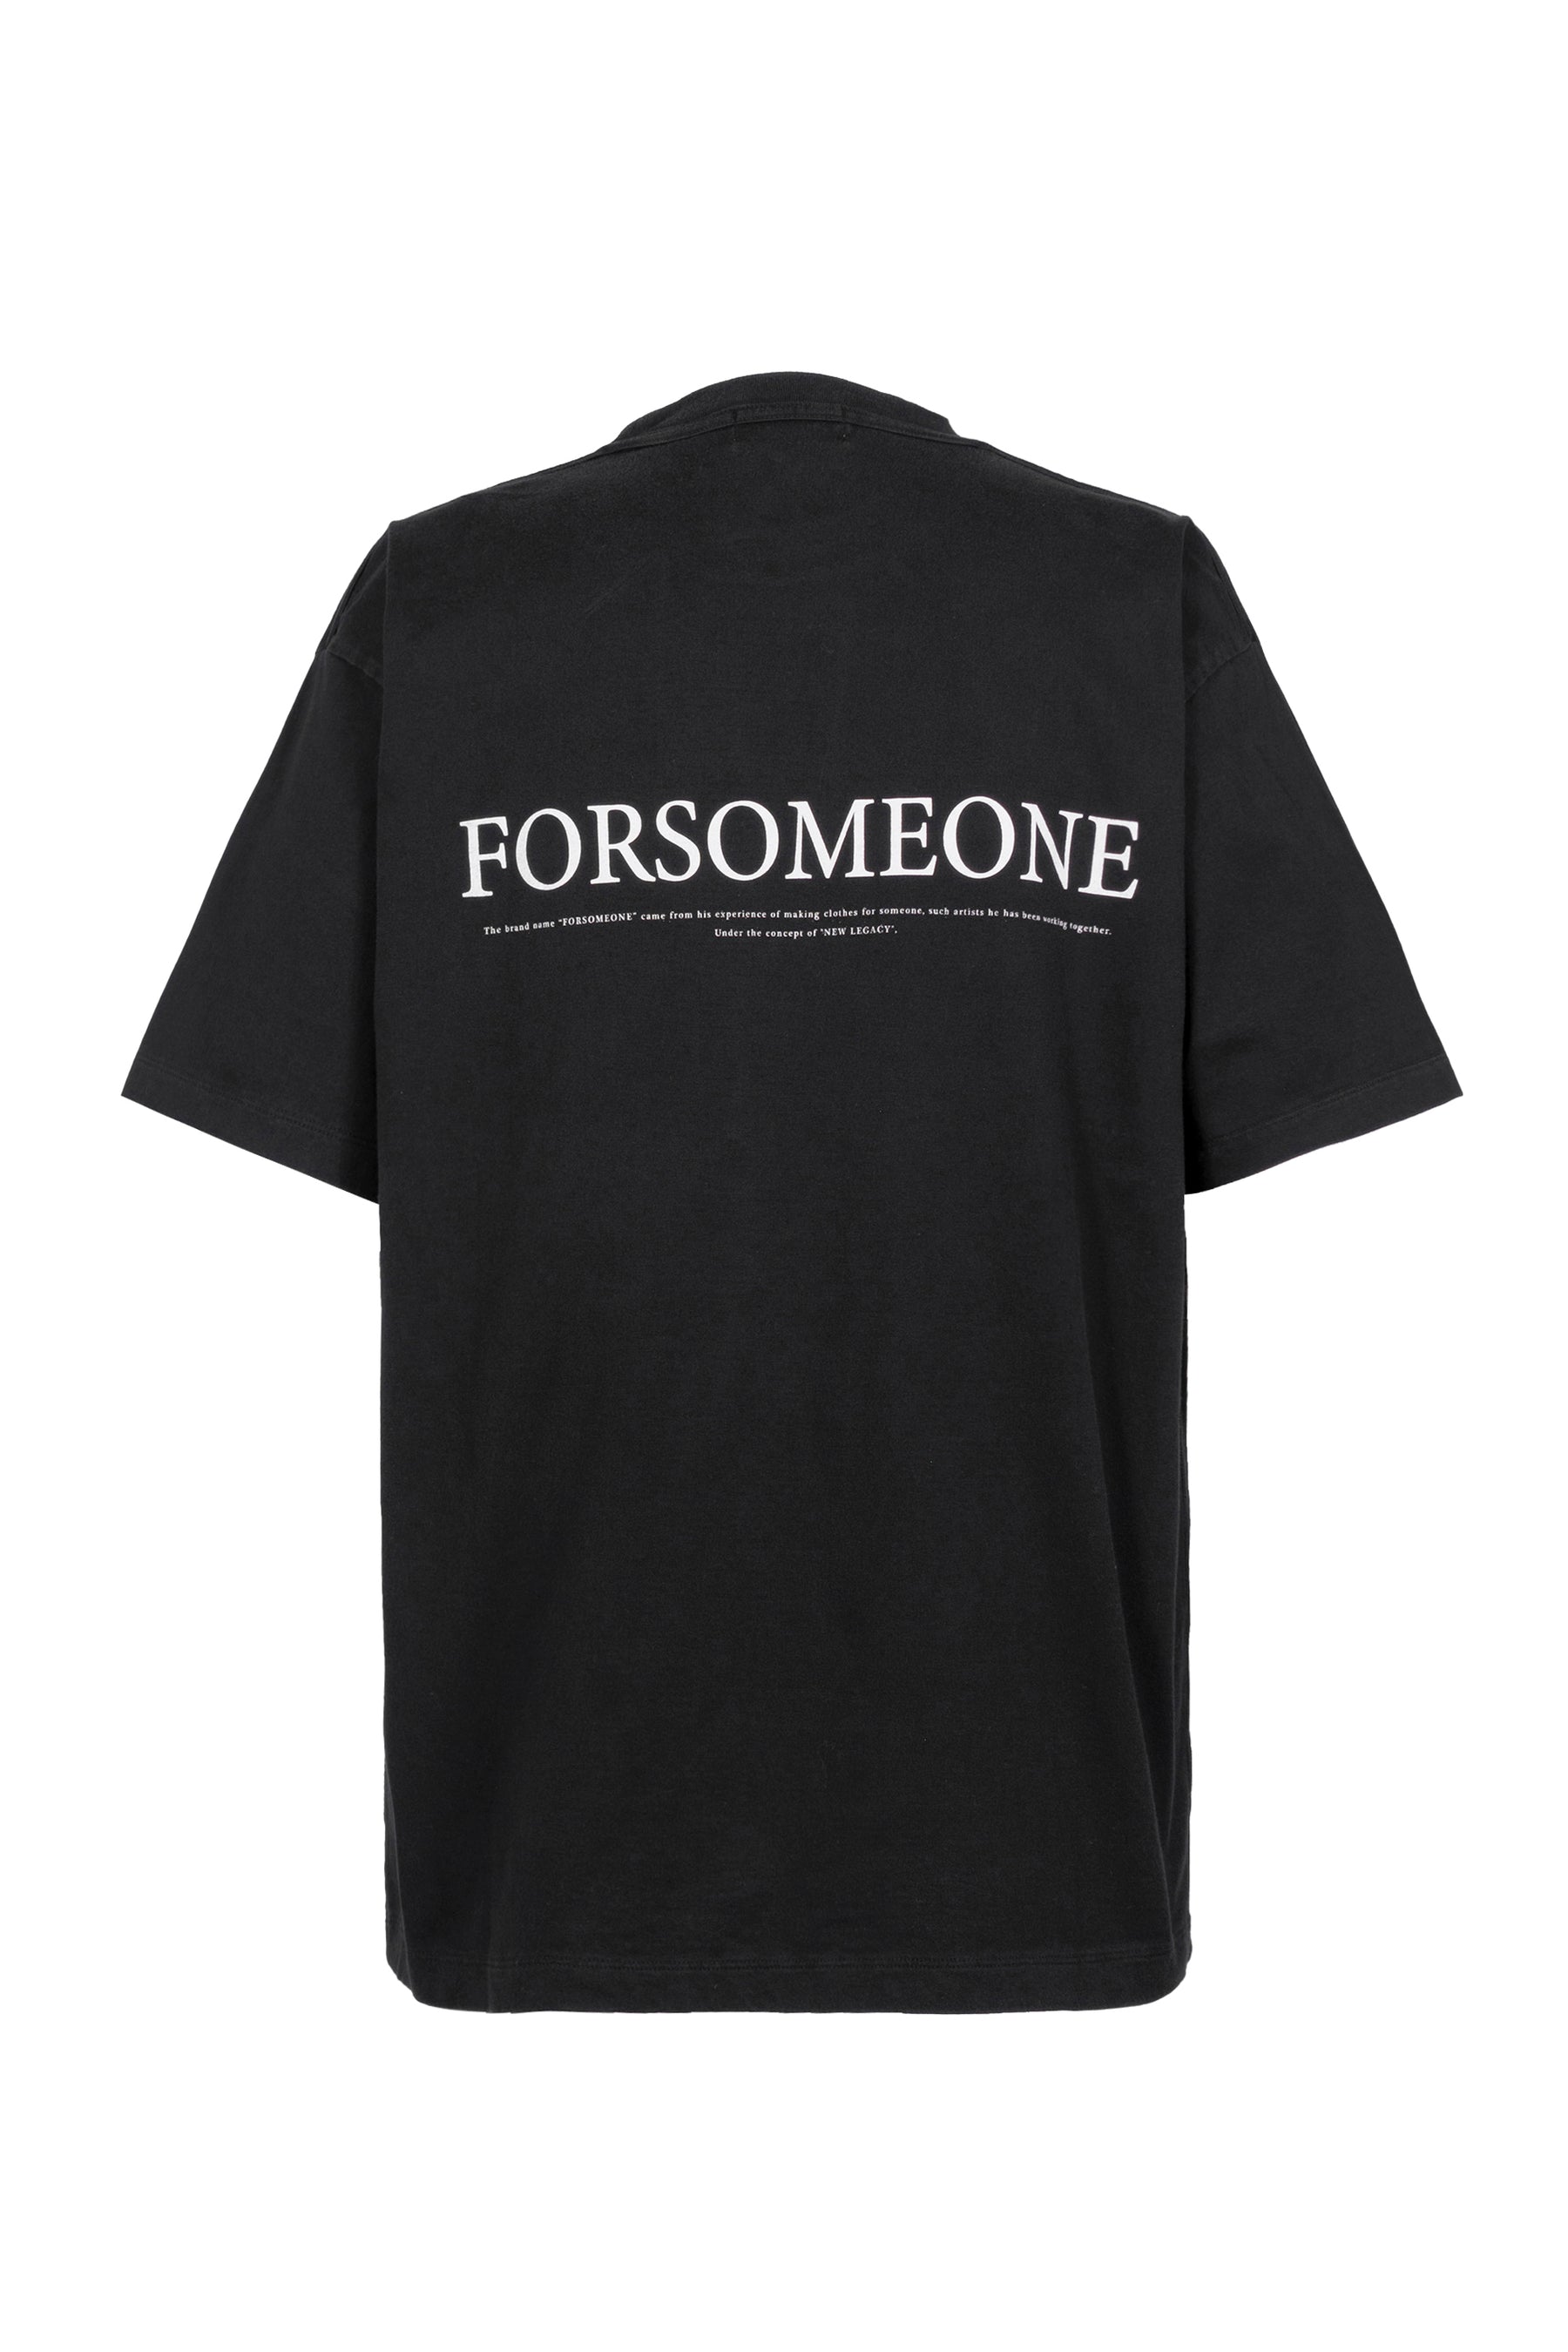 FORSOMEONE SS23 CL LOGO TEE / BLK - NUBIAN